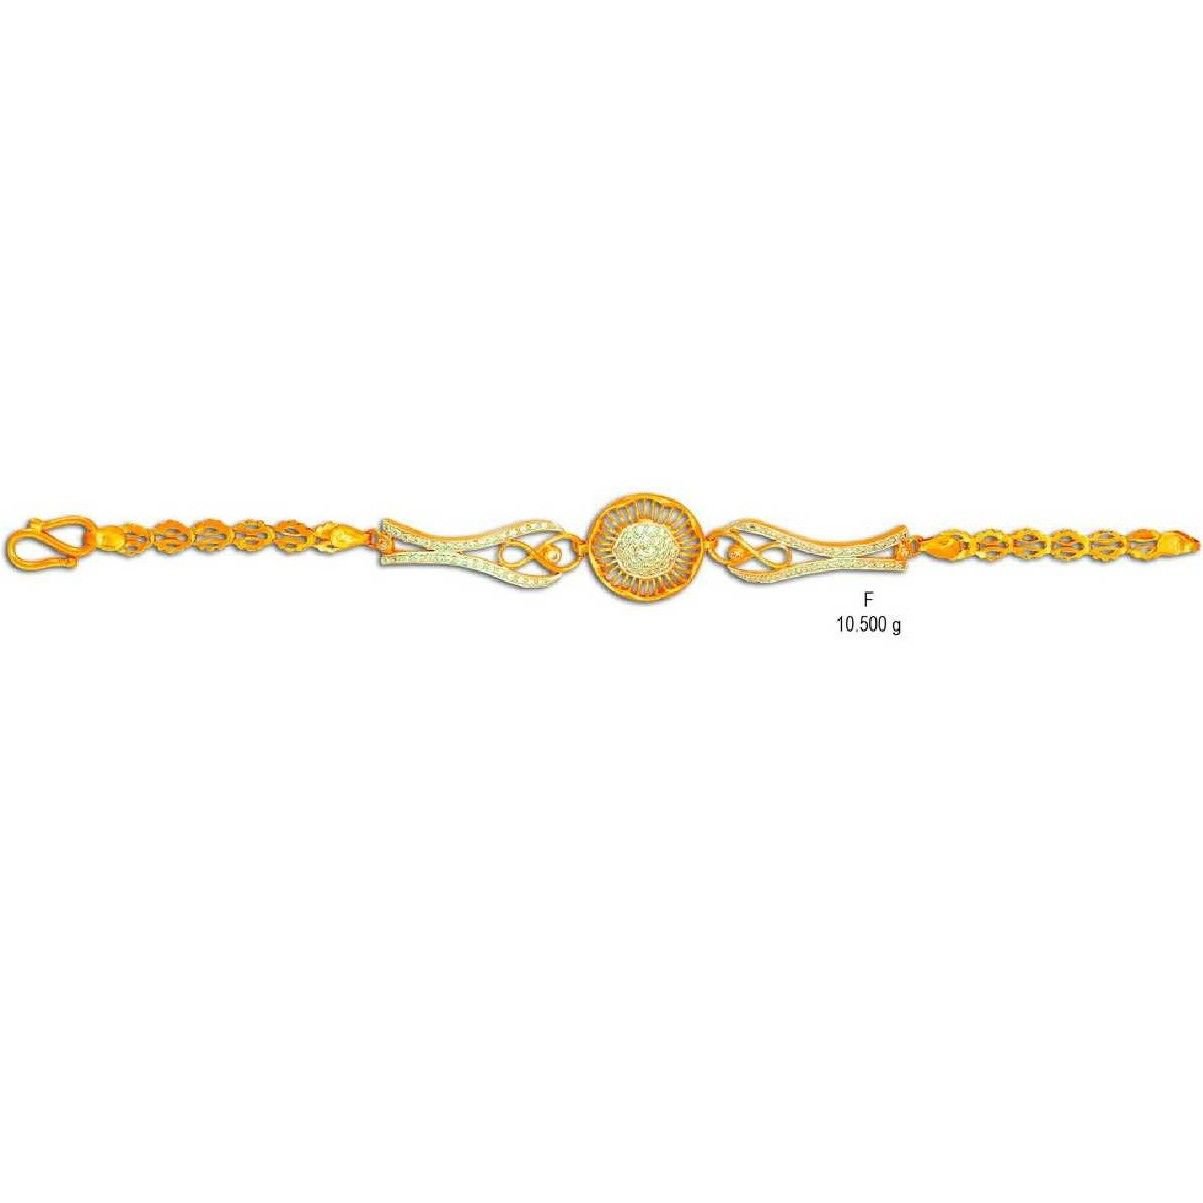 Fancy Italian Hammered Wire Gold Twisted Bracelet in 14k white and yellow  gold (B-1042)